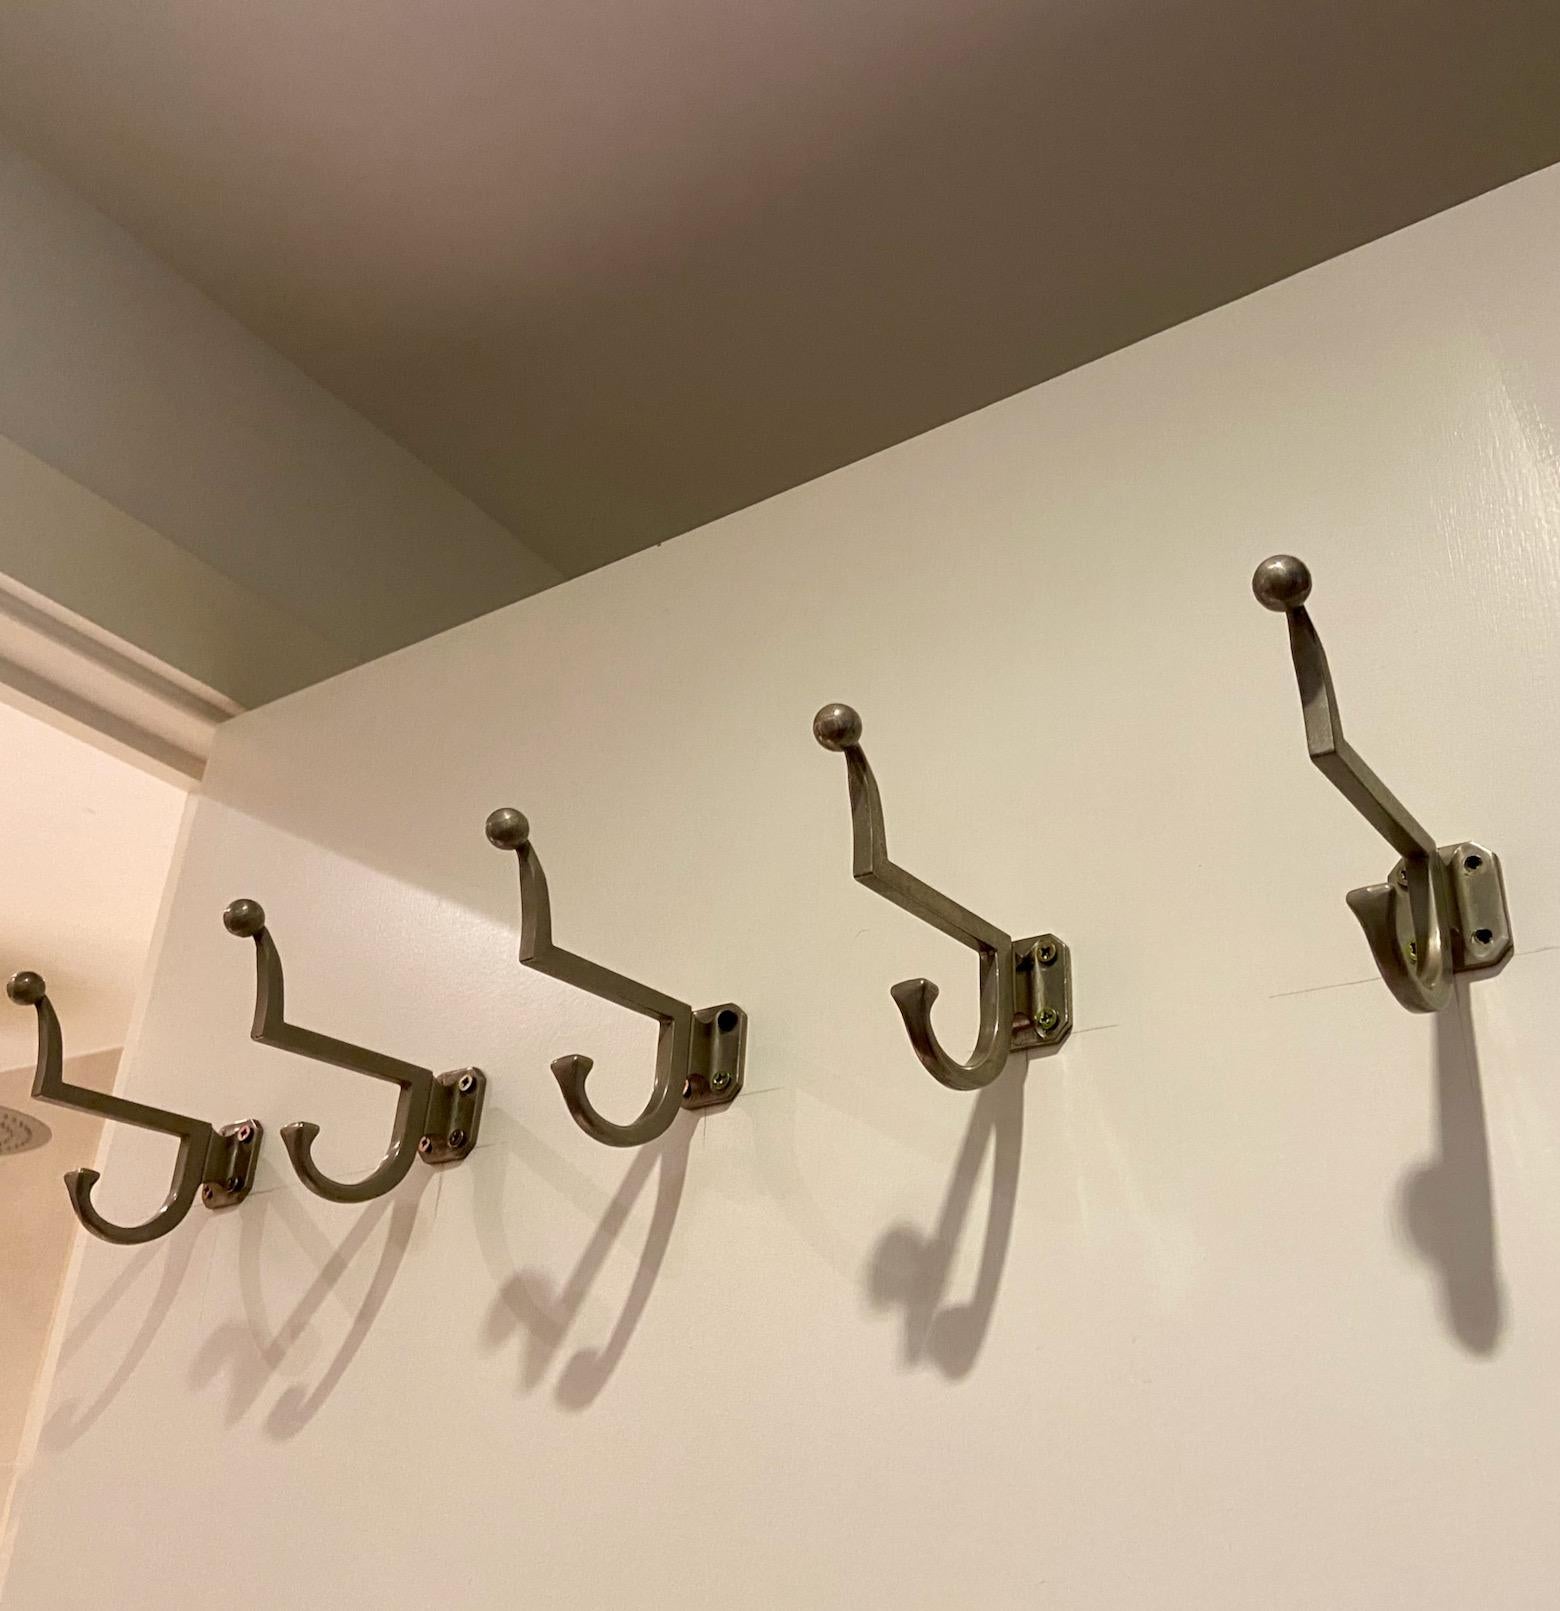 a set of 5 metal coat hooks or hangers, most probably French,  modernist art deco